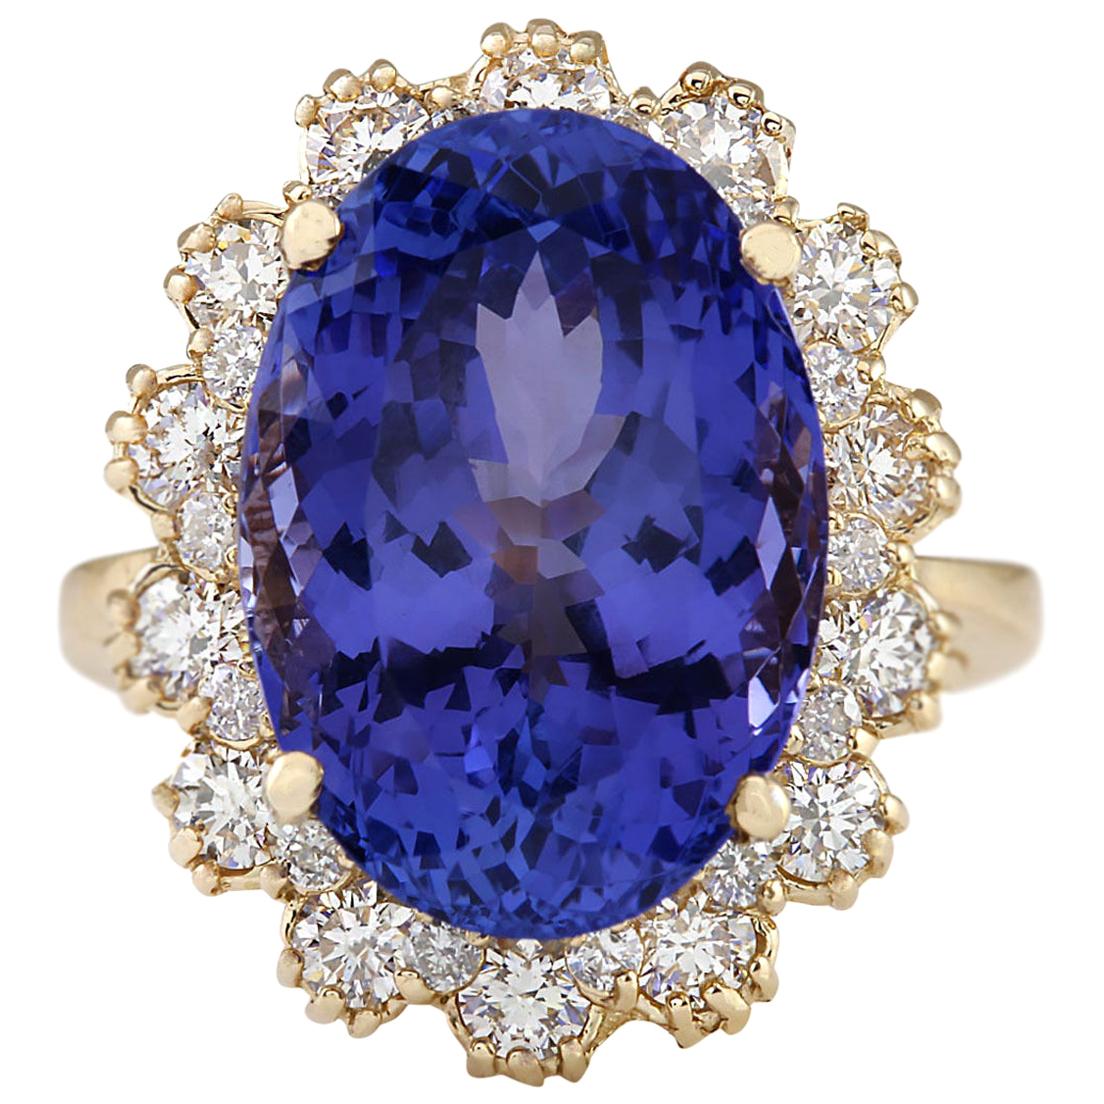 Exquisite Natural Tanzanite and Diamond Ring in 14K Yellow Gold